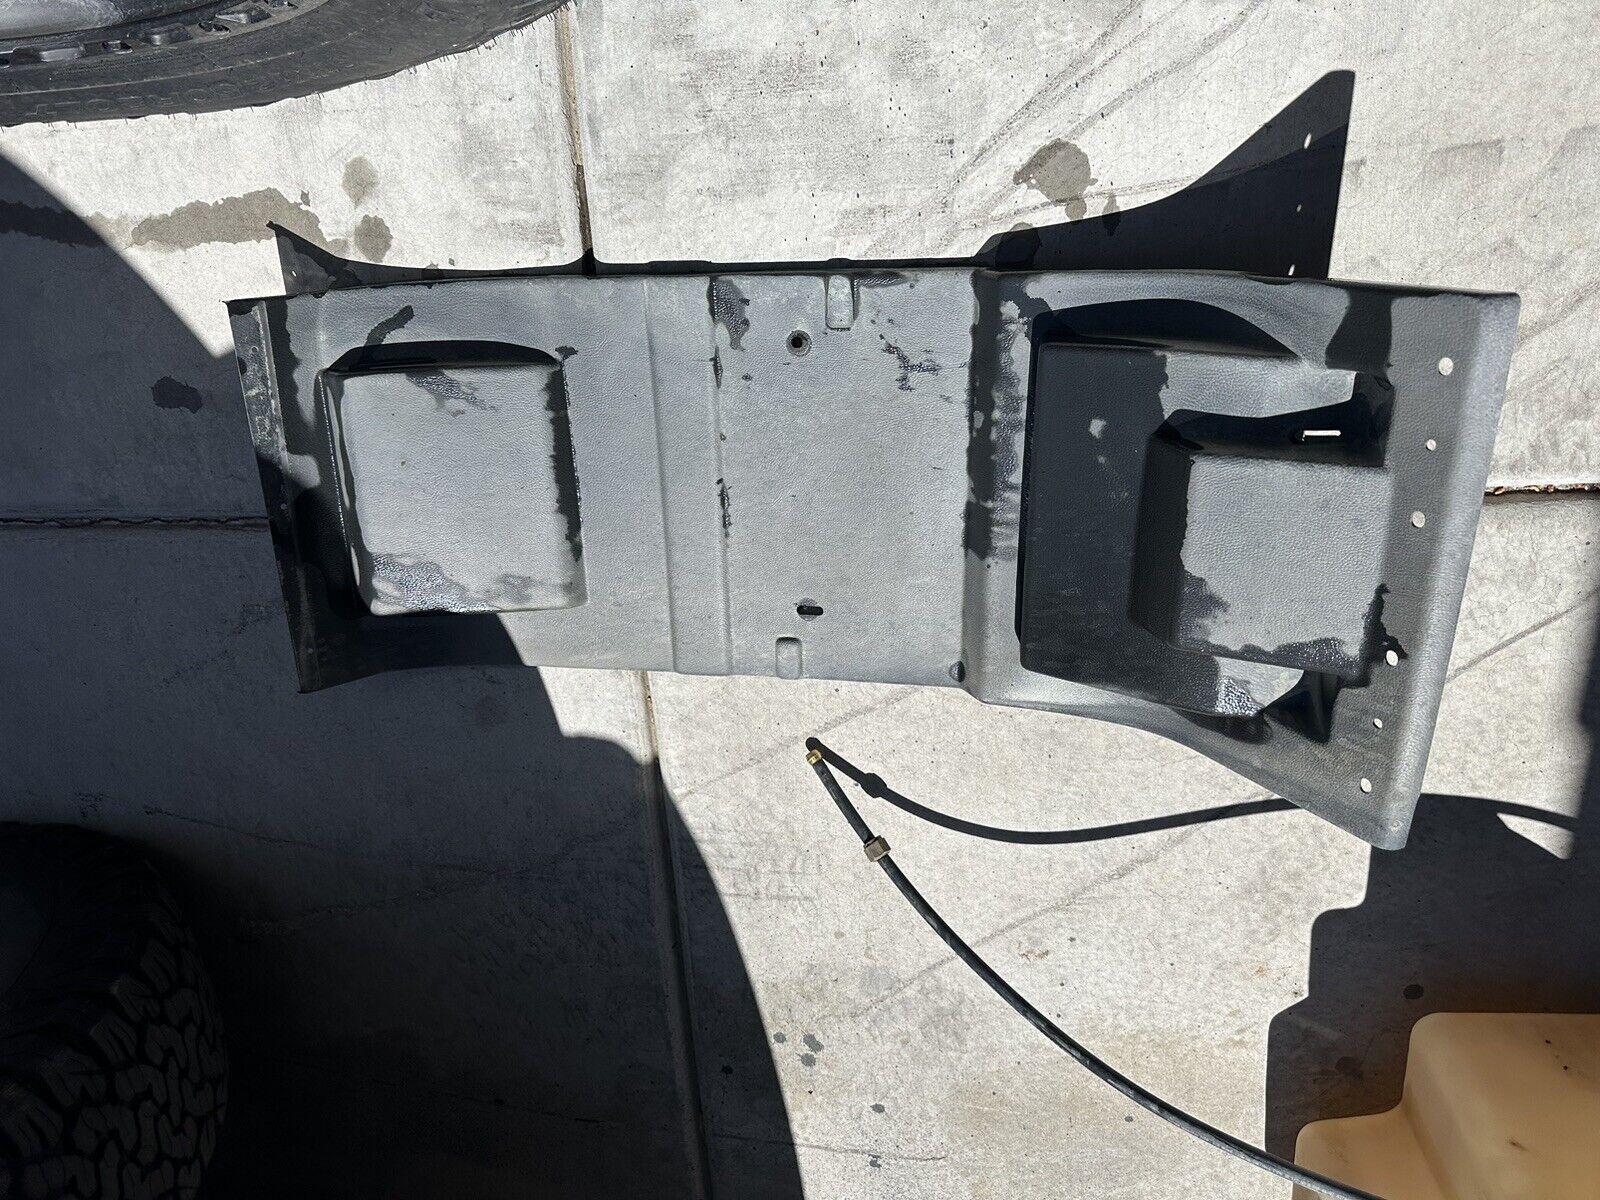 HMMWV HUMVEE M1151 M998 Used A/C CONDENSER CLOSEOUT REAR PANEL 